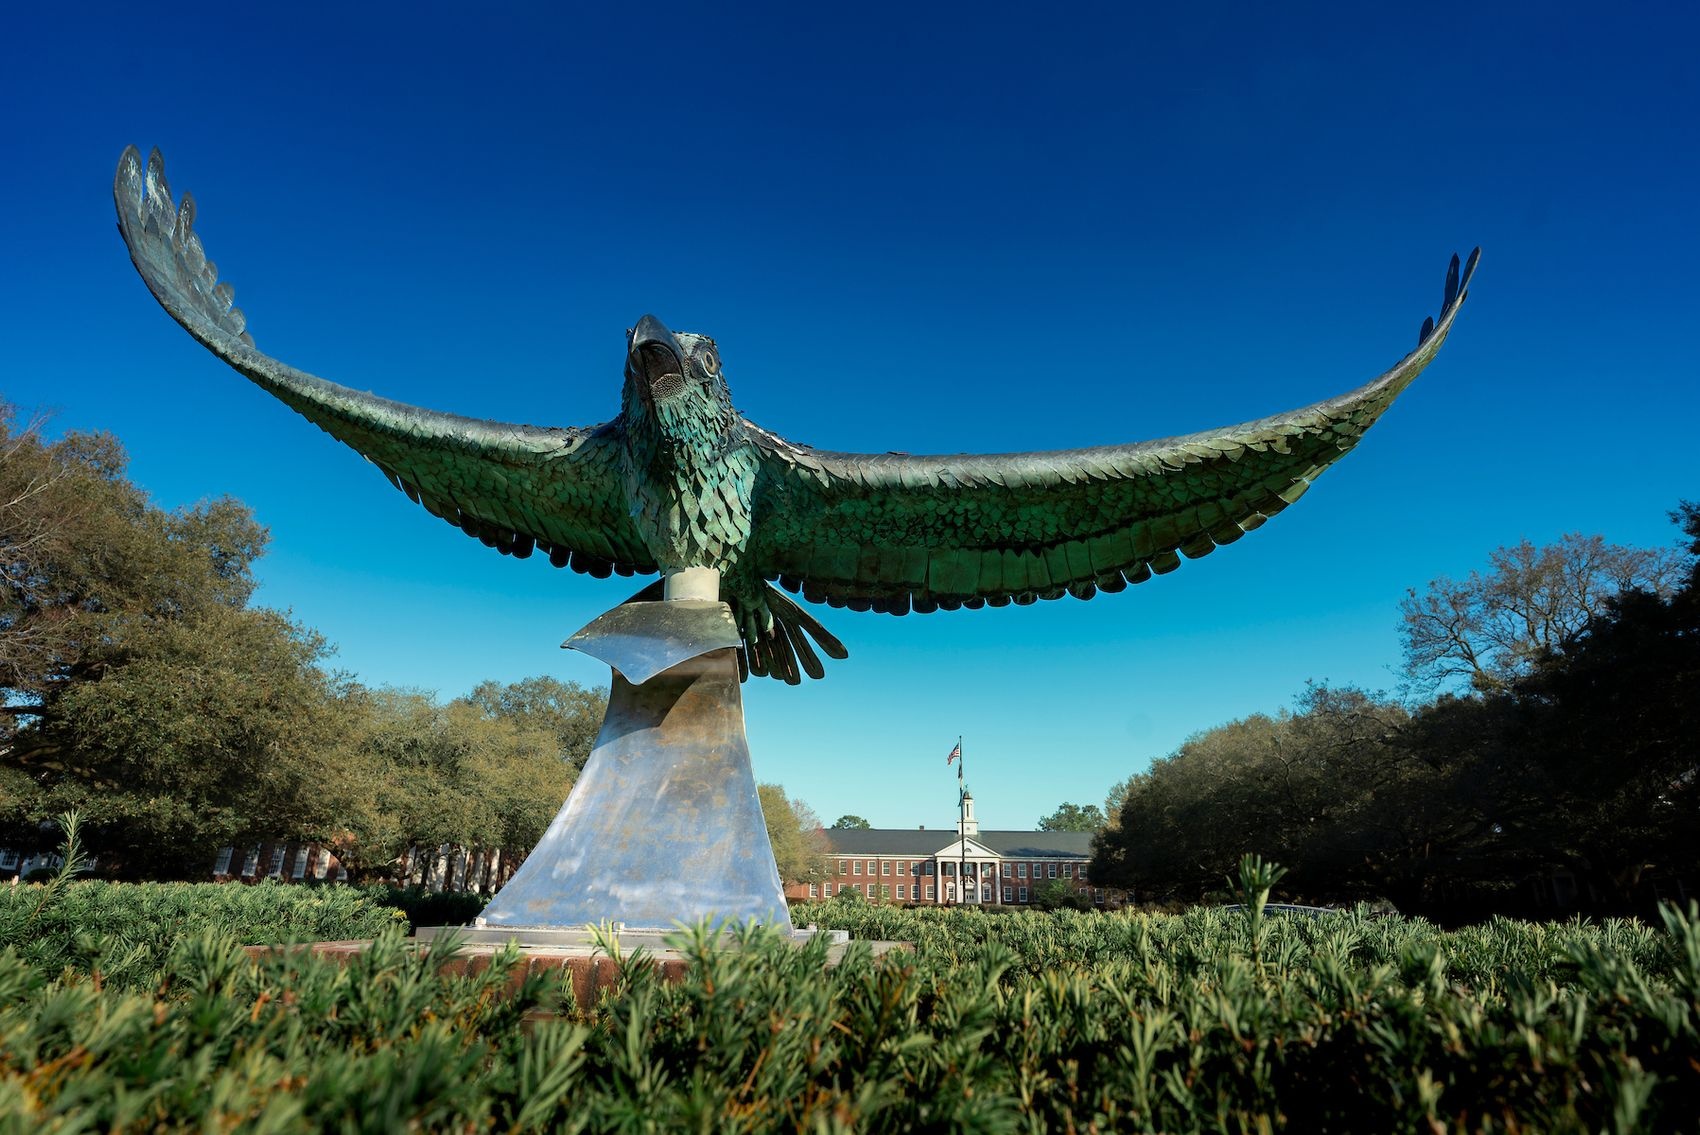 Soaring Seahawk sculpture in the middle of the Wagoner Drive traffic circle